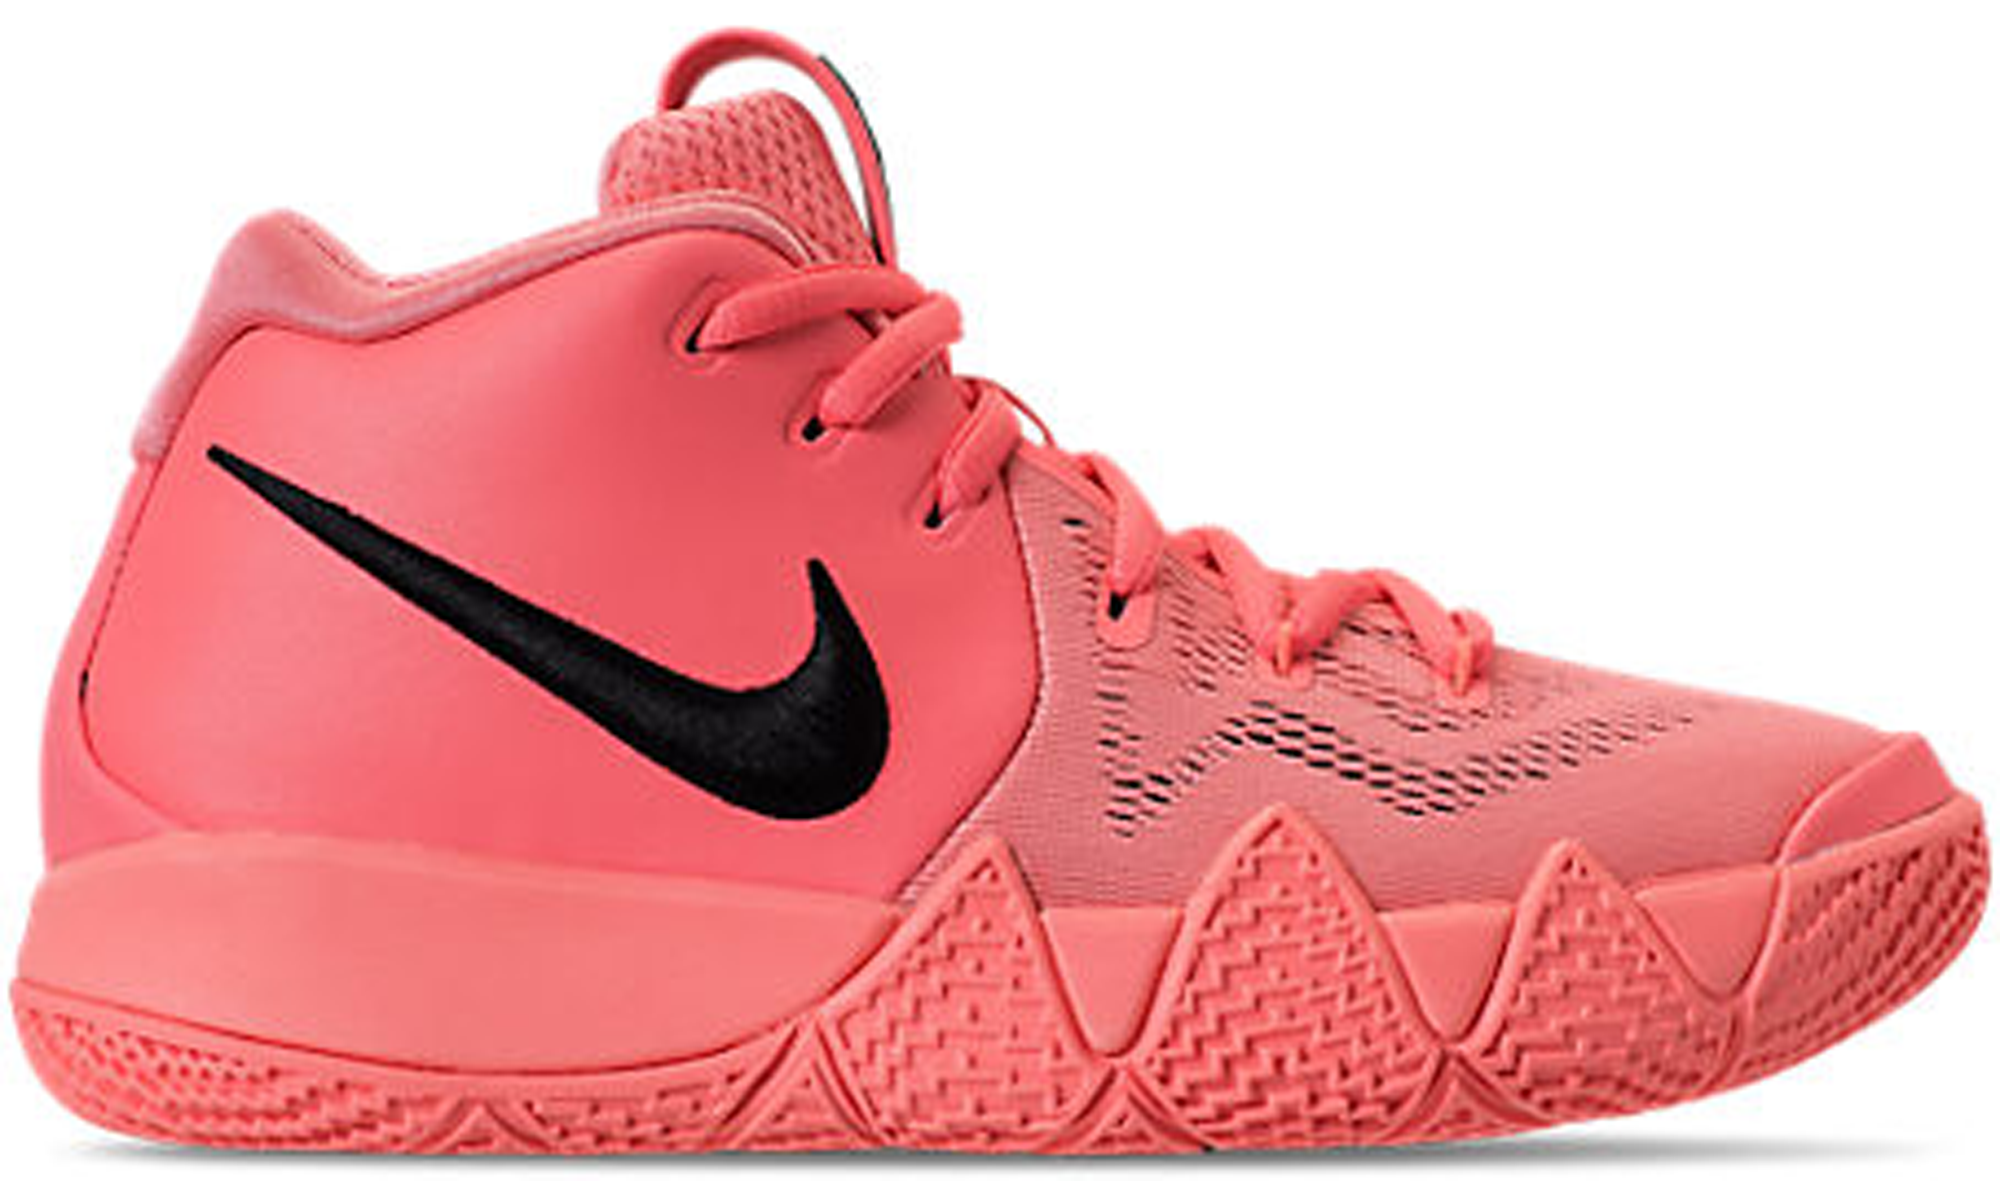 kyrie 4 hot pink